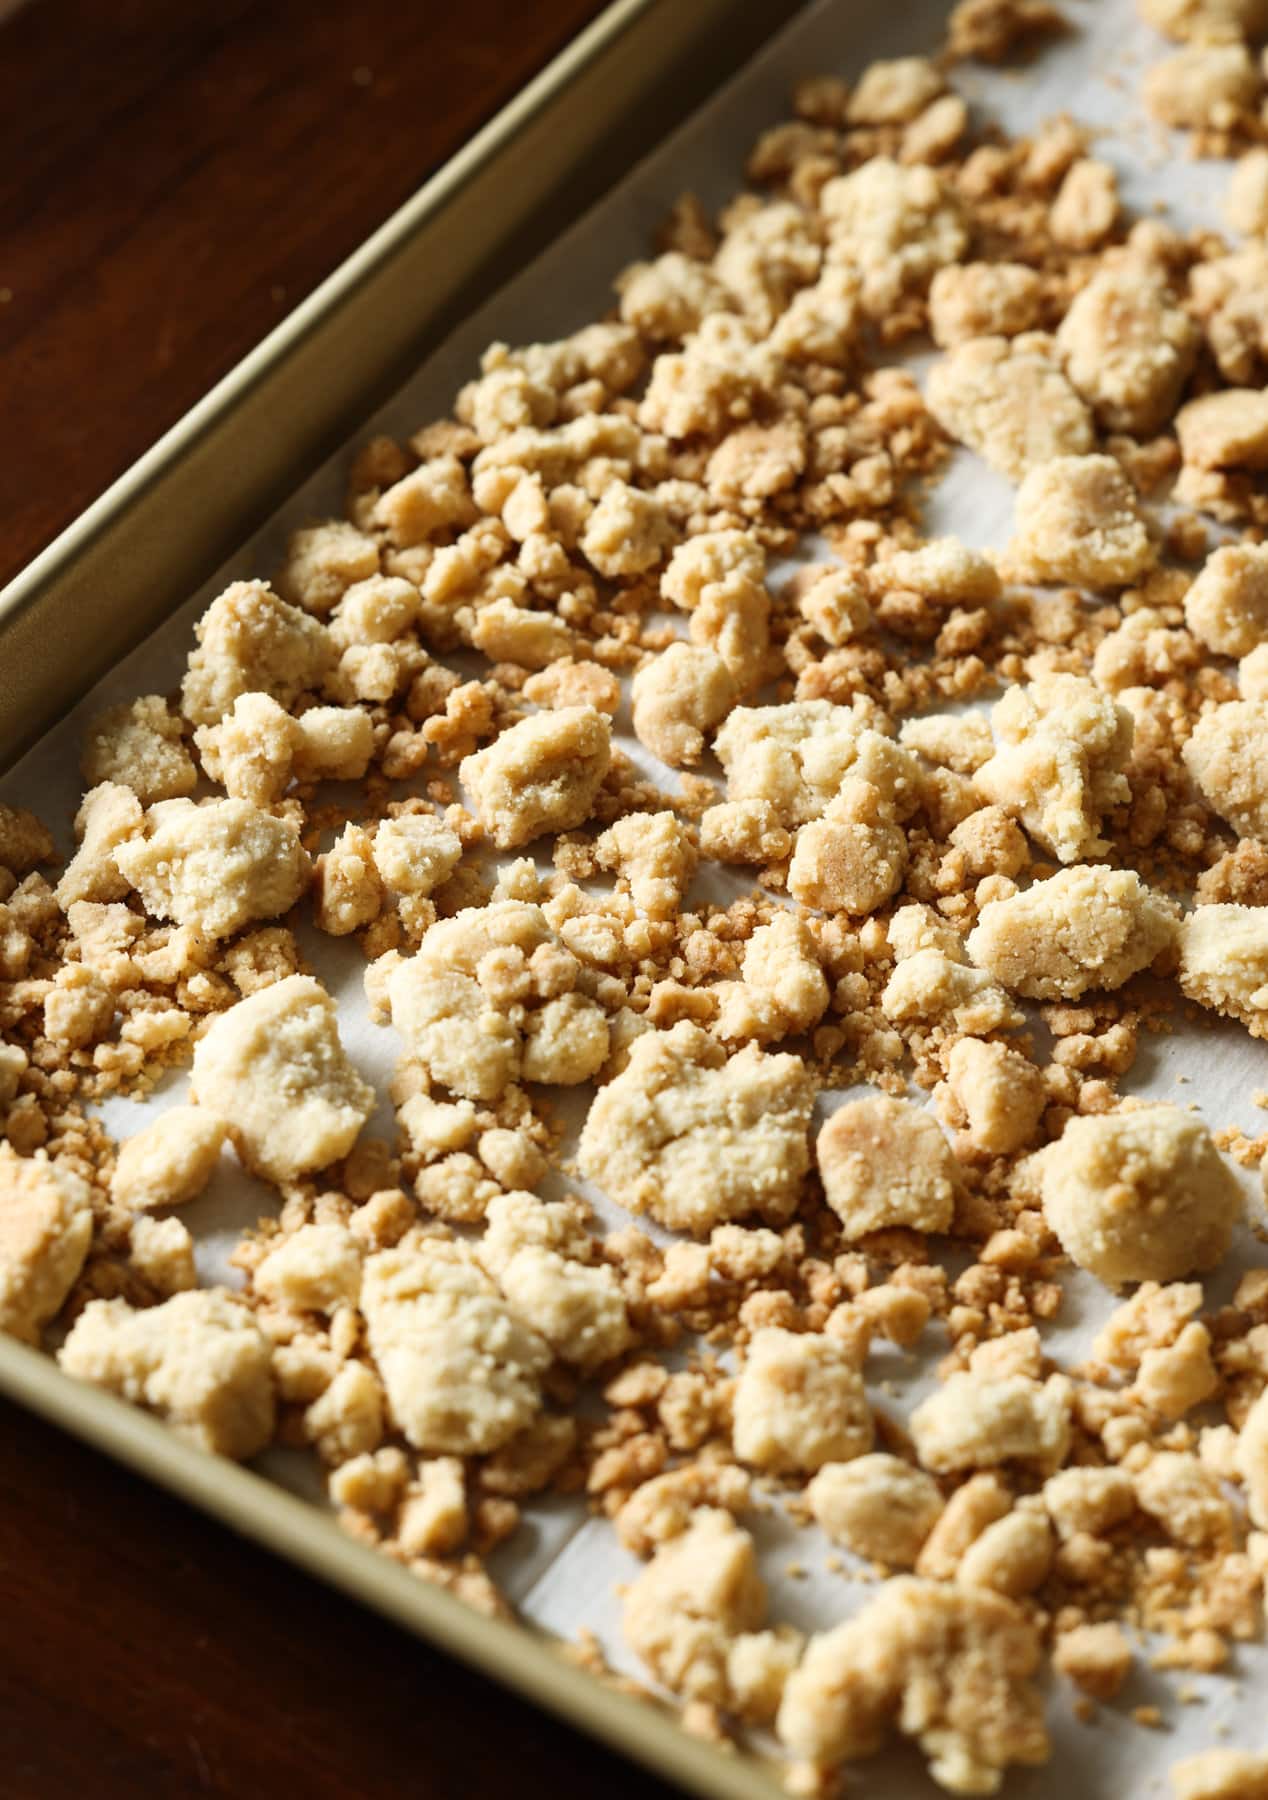 Crunchy Crumble topping baked on a parchment lined baking sheet